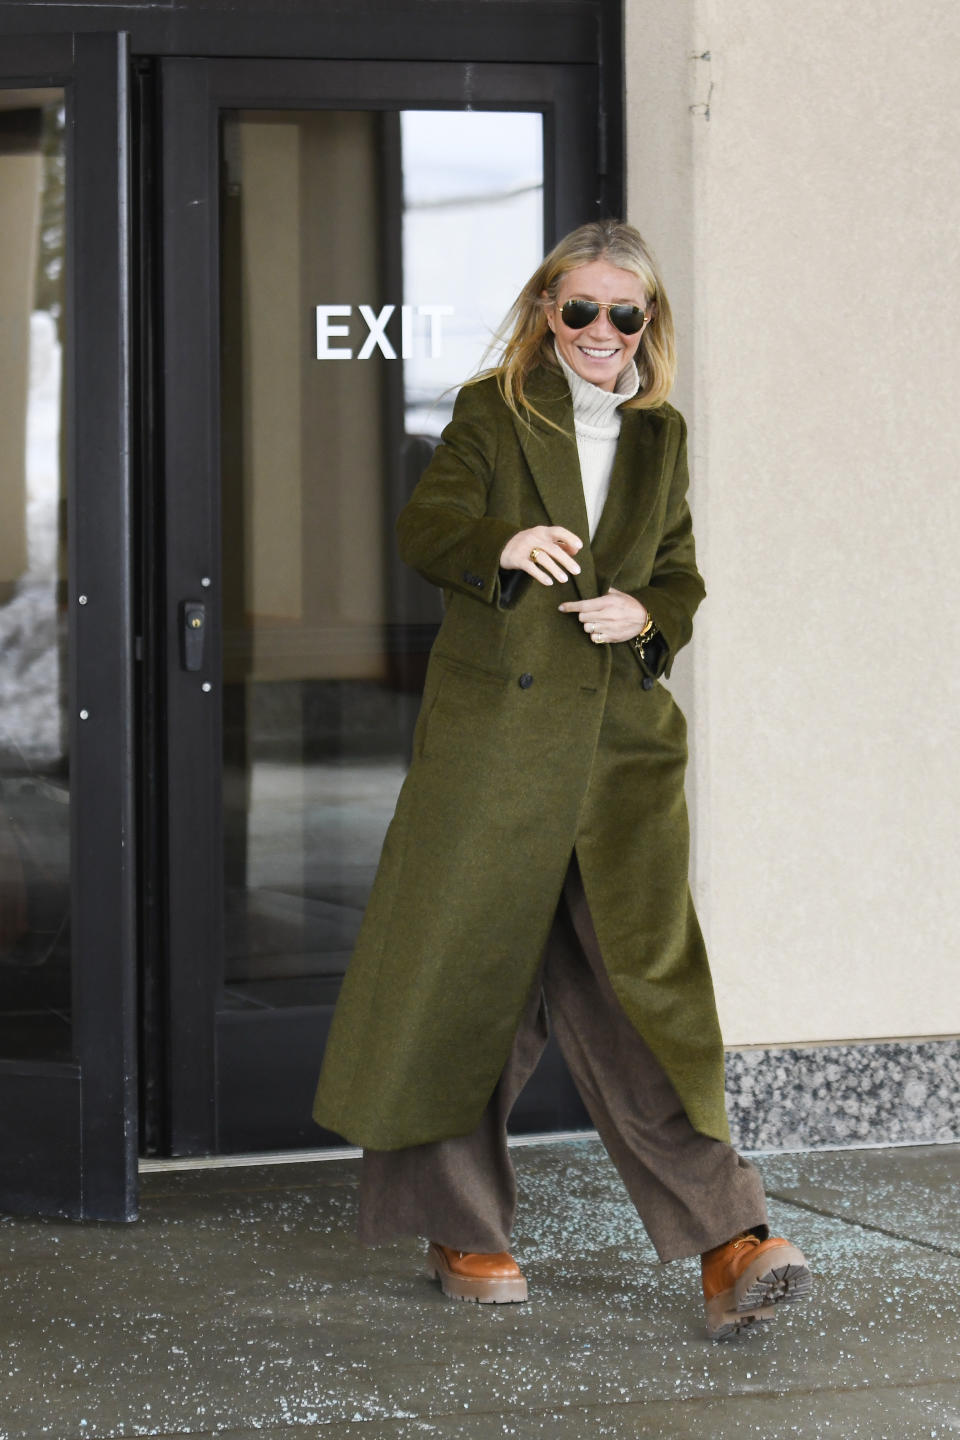 Actor Gwyneth Paltrow leaves the courthouse, Tuesday, March 21, 2023, in Park City, Utah, where she is accused in a lawsuit of crashing into a skier during a 2016 family ski vacation, leaving him with brain damage and four broken ribs. Terry Sanderson claims that the actor-turned-lifestyle influencer was cruising down the slopes so recklessly that they violently collided, leaving him on the ground as she and her entourage continued their descent down Deer Valley Resort, a skiers-only mountain known for its groomed runs, après-ski champagne yurts and posh clientele. (AP Photo/Alex Goodlett)